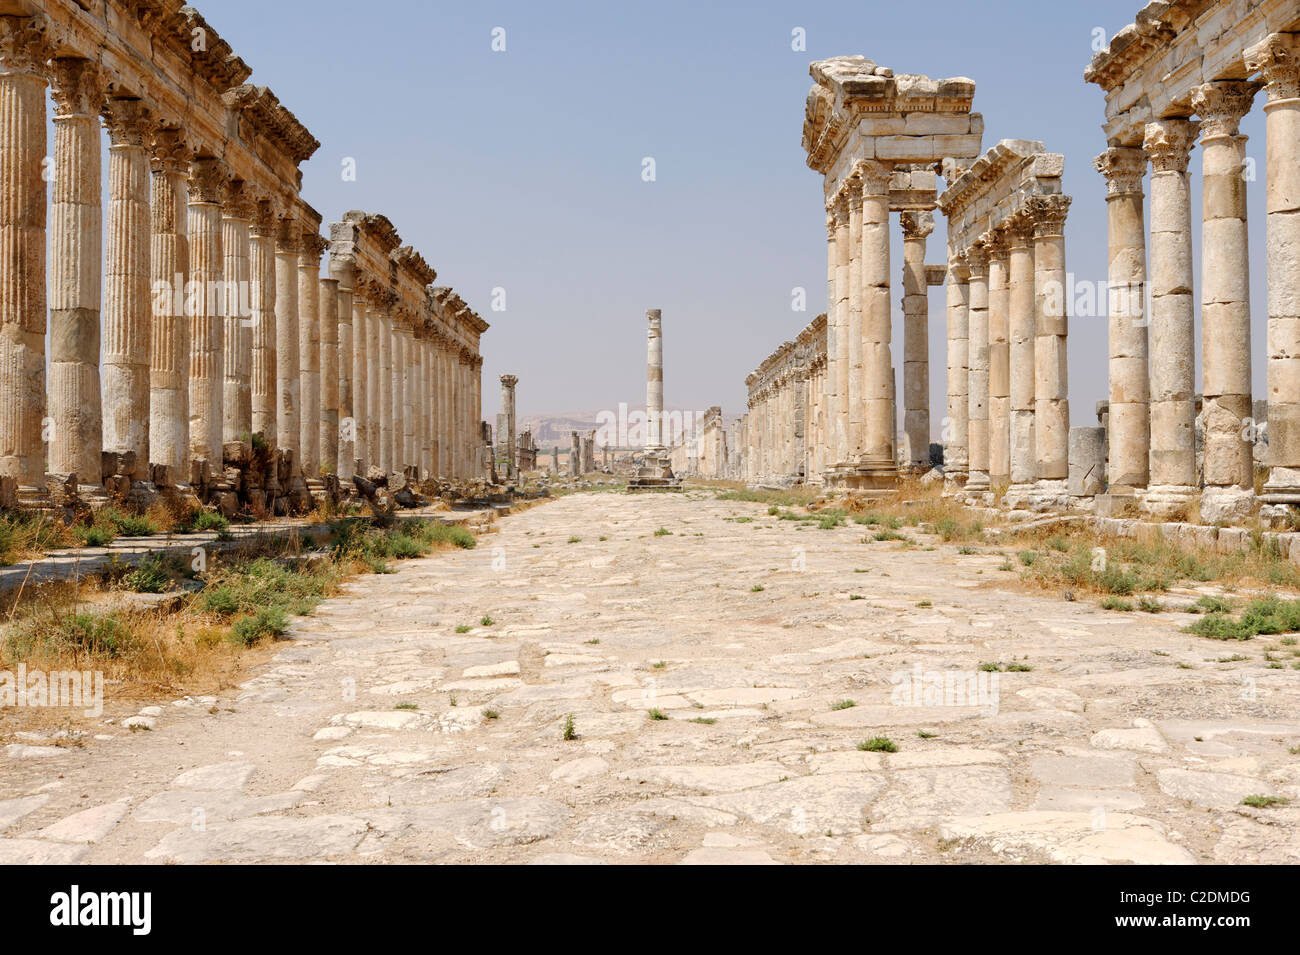 Apamea. Syria. The grand colonnaded avenue or cardo maximus which is lined with tall columns with majestic Corinthian capitals. Stock Photo